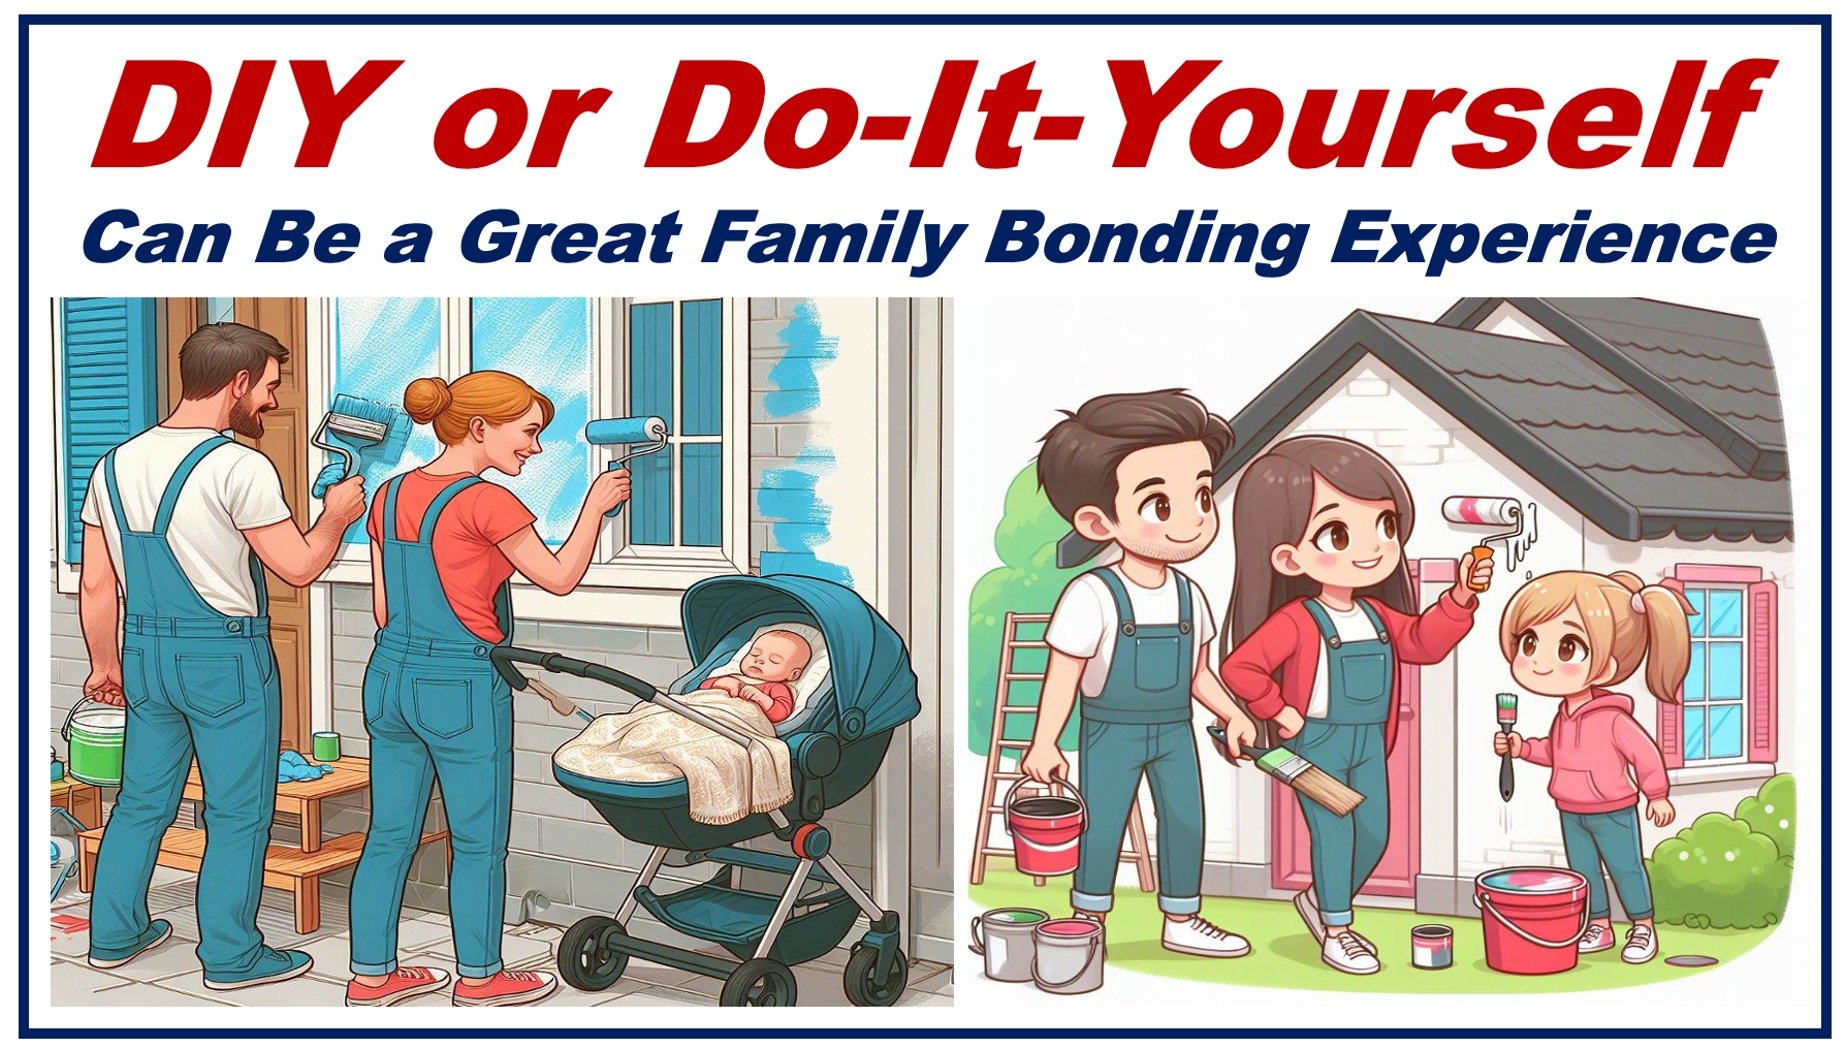 Two cartoon-type images of families doing DIY - painting their house.